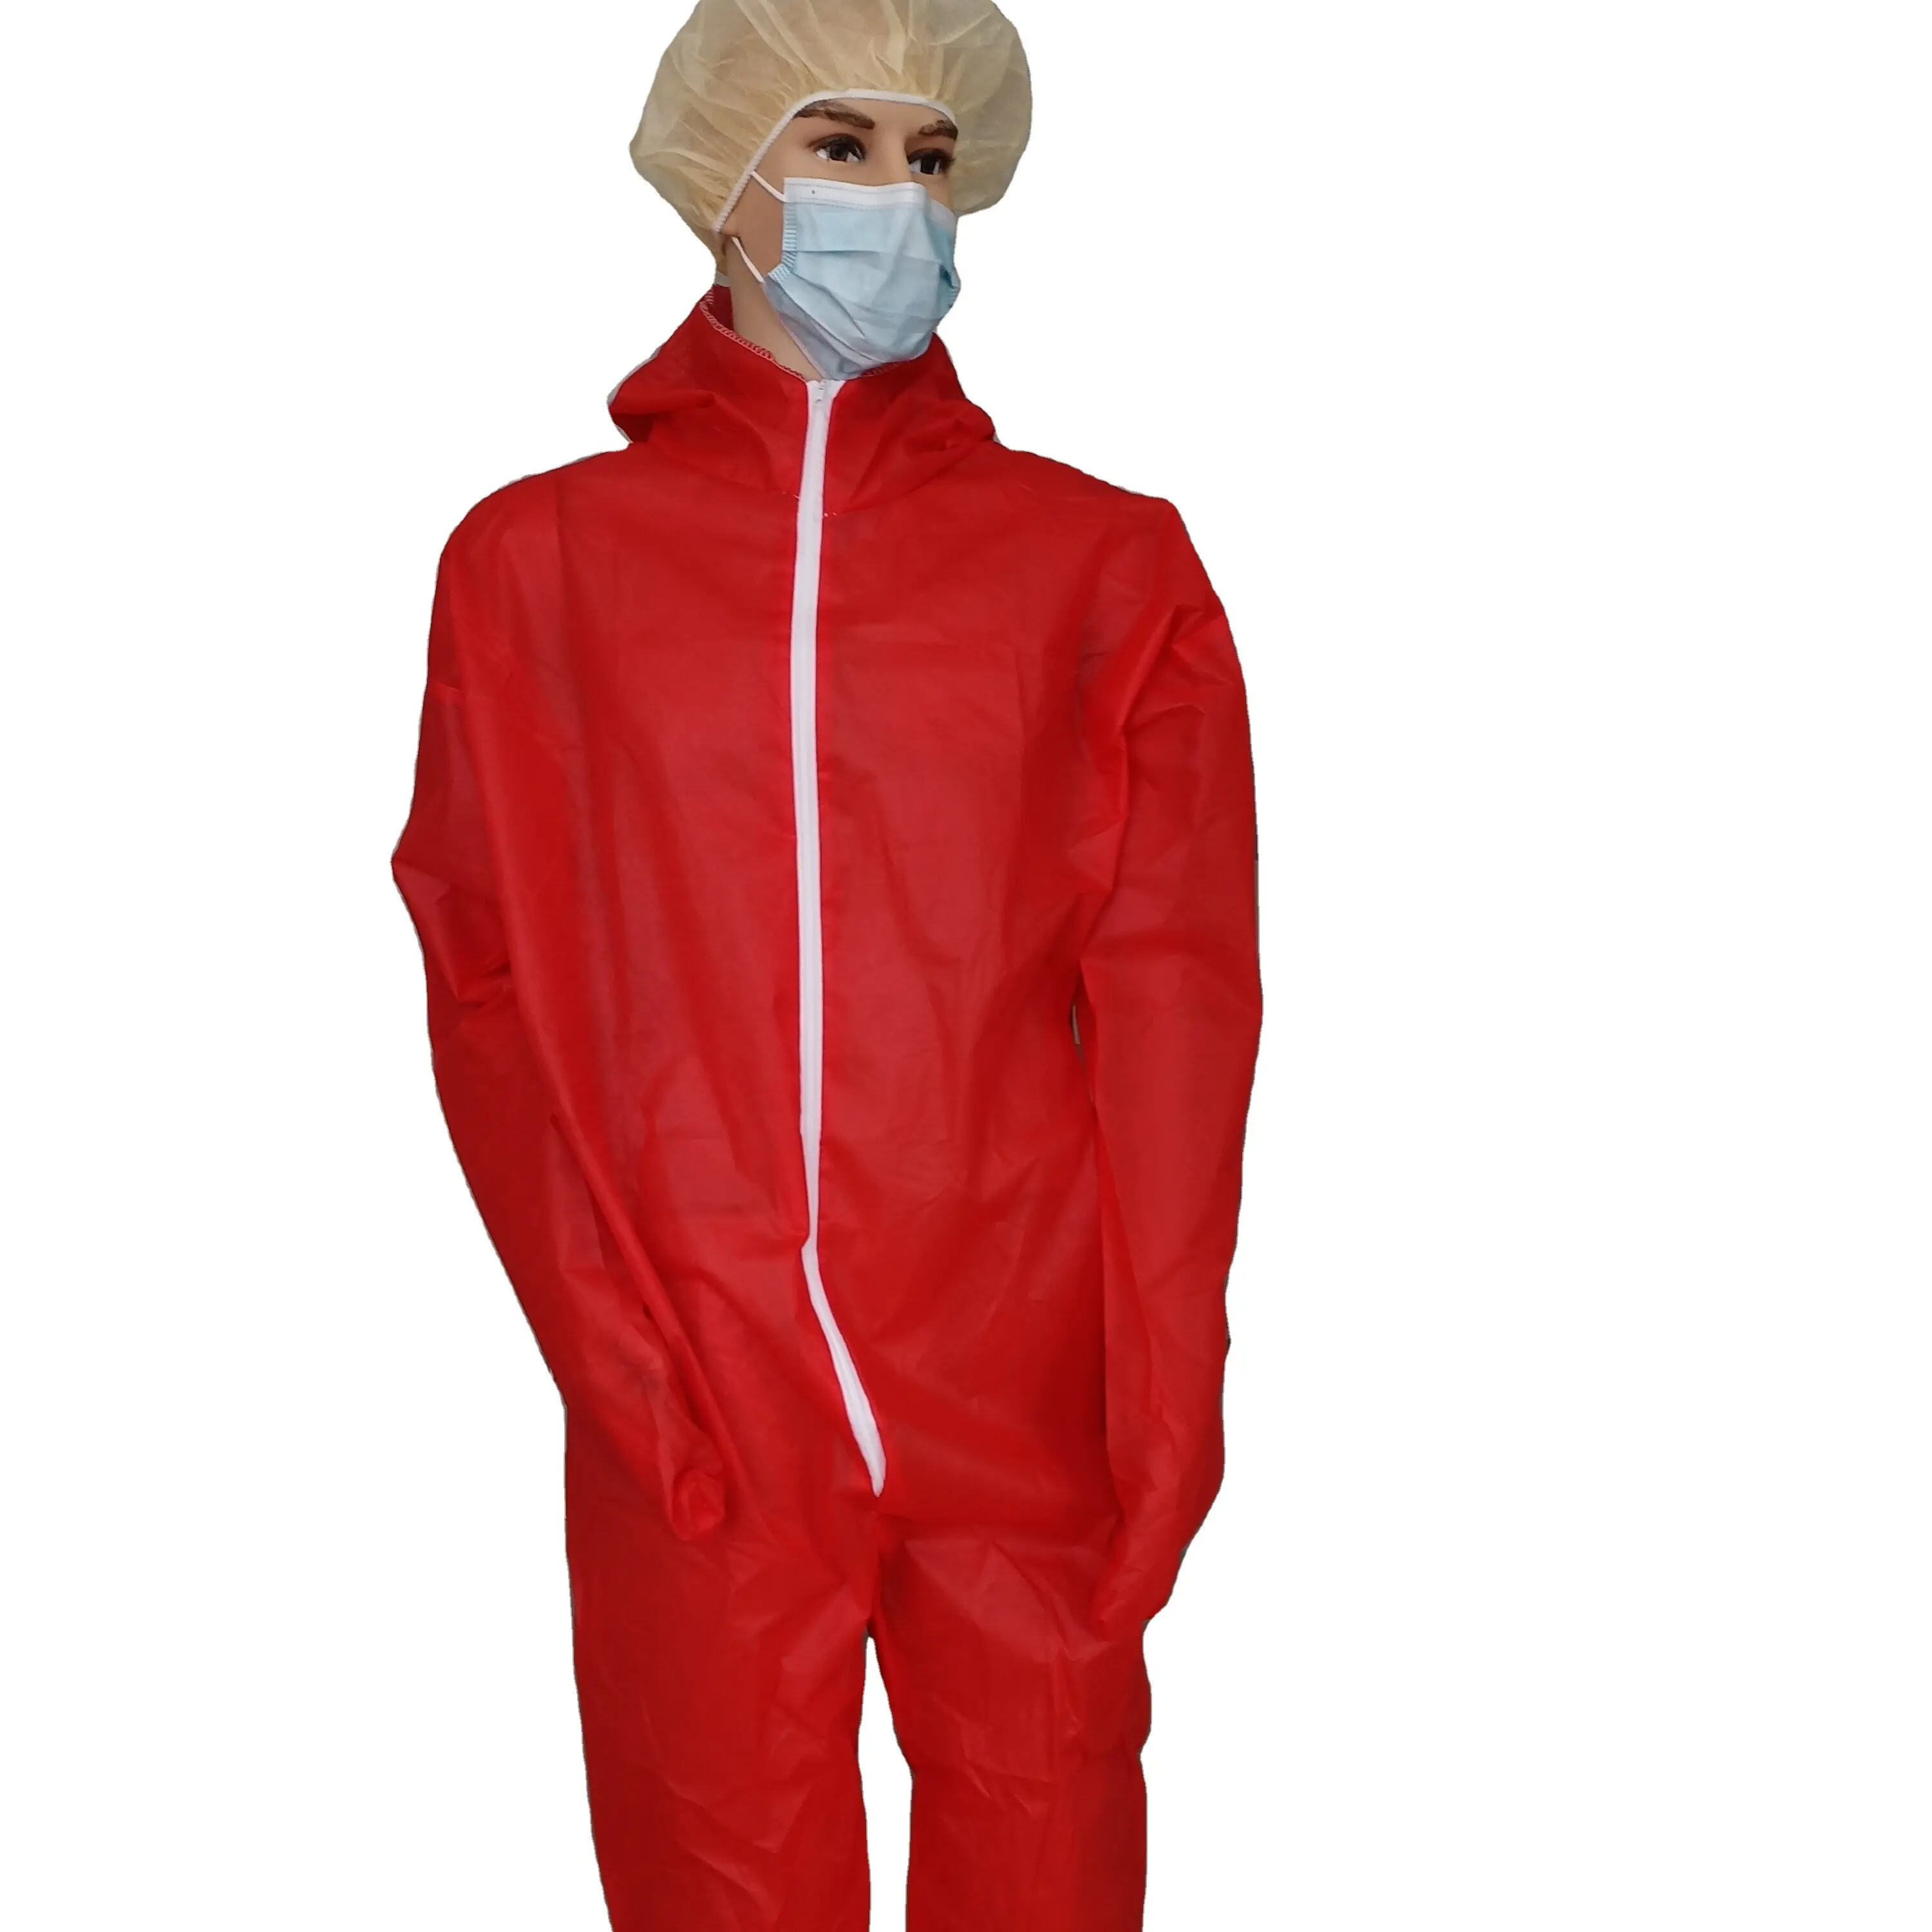 Biohazard Chemical Protection Hazmat Suits Sealed Tape Disposable Coverall PPE Suit Full Body protection suit